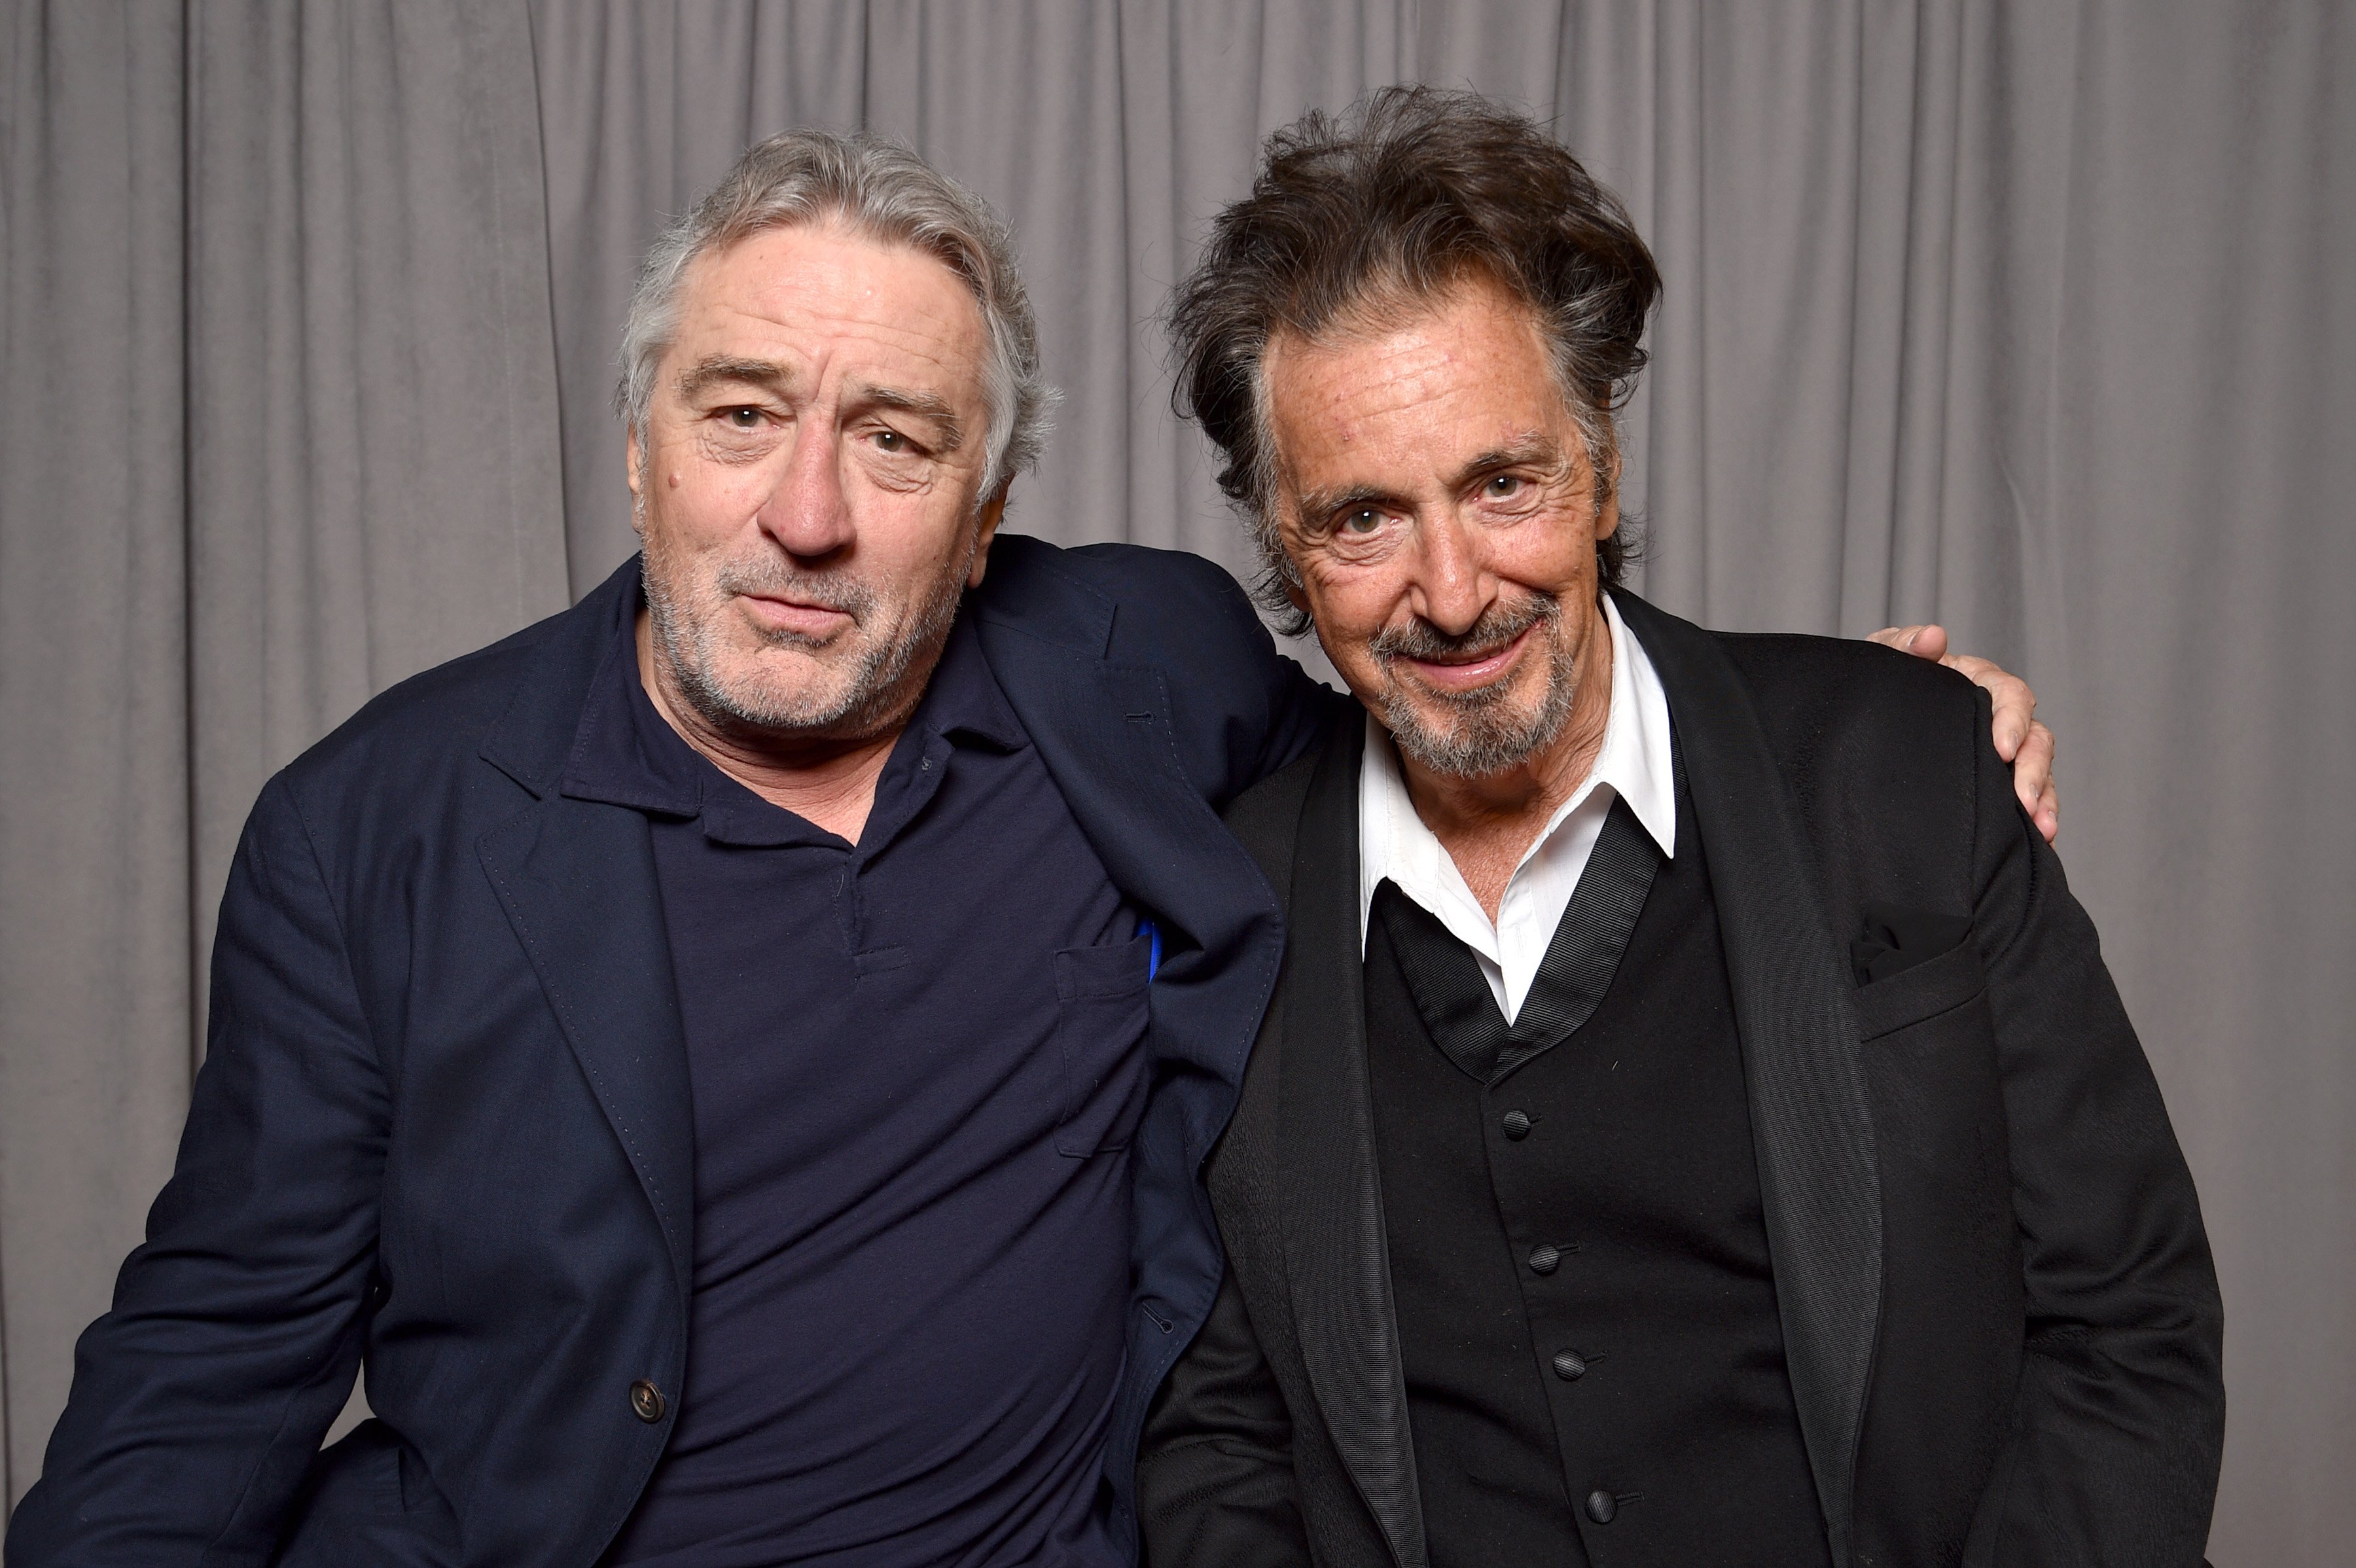 Photo of Robert DeNiro and Al Pacino at "The Godfather" 45th Anniversary screening on April 29, 2017 | Source: Getty Images